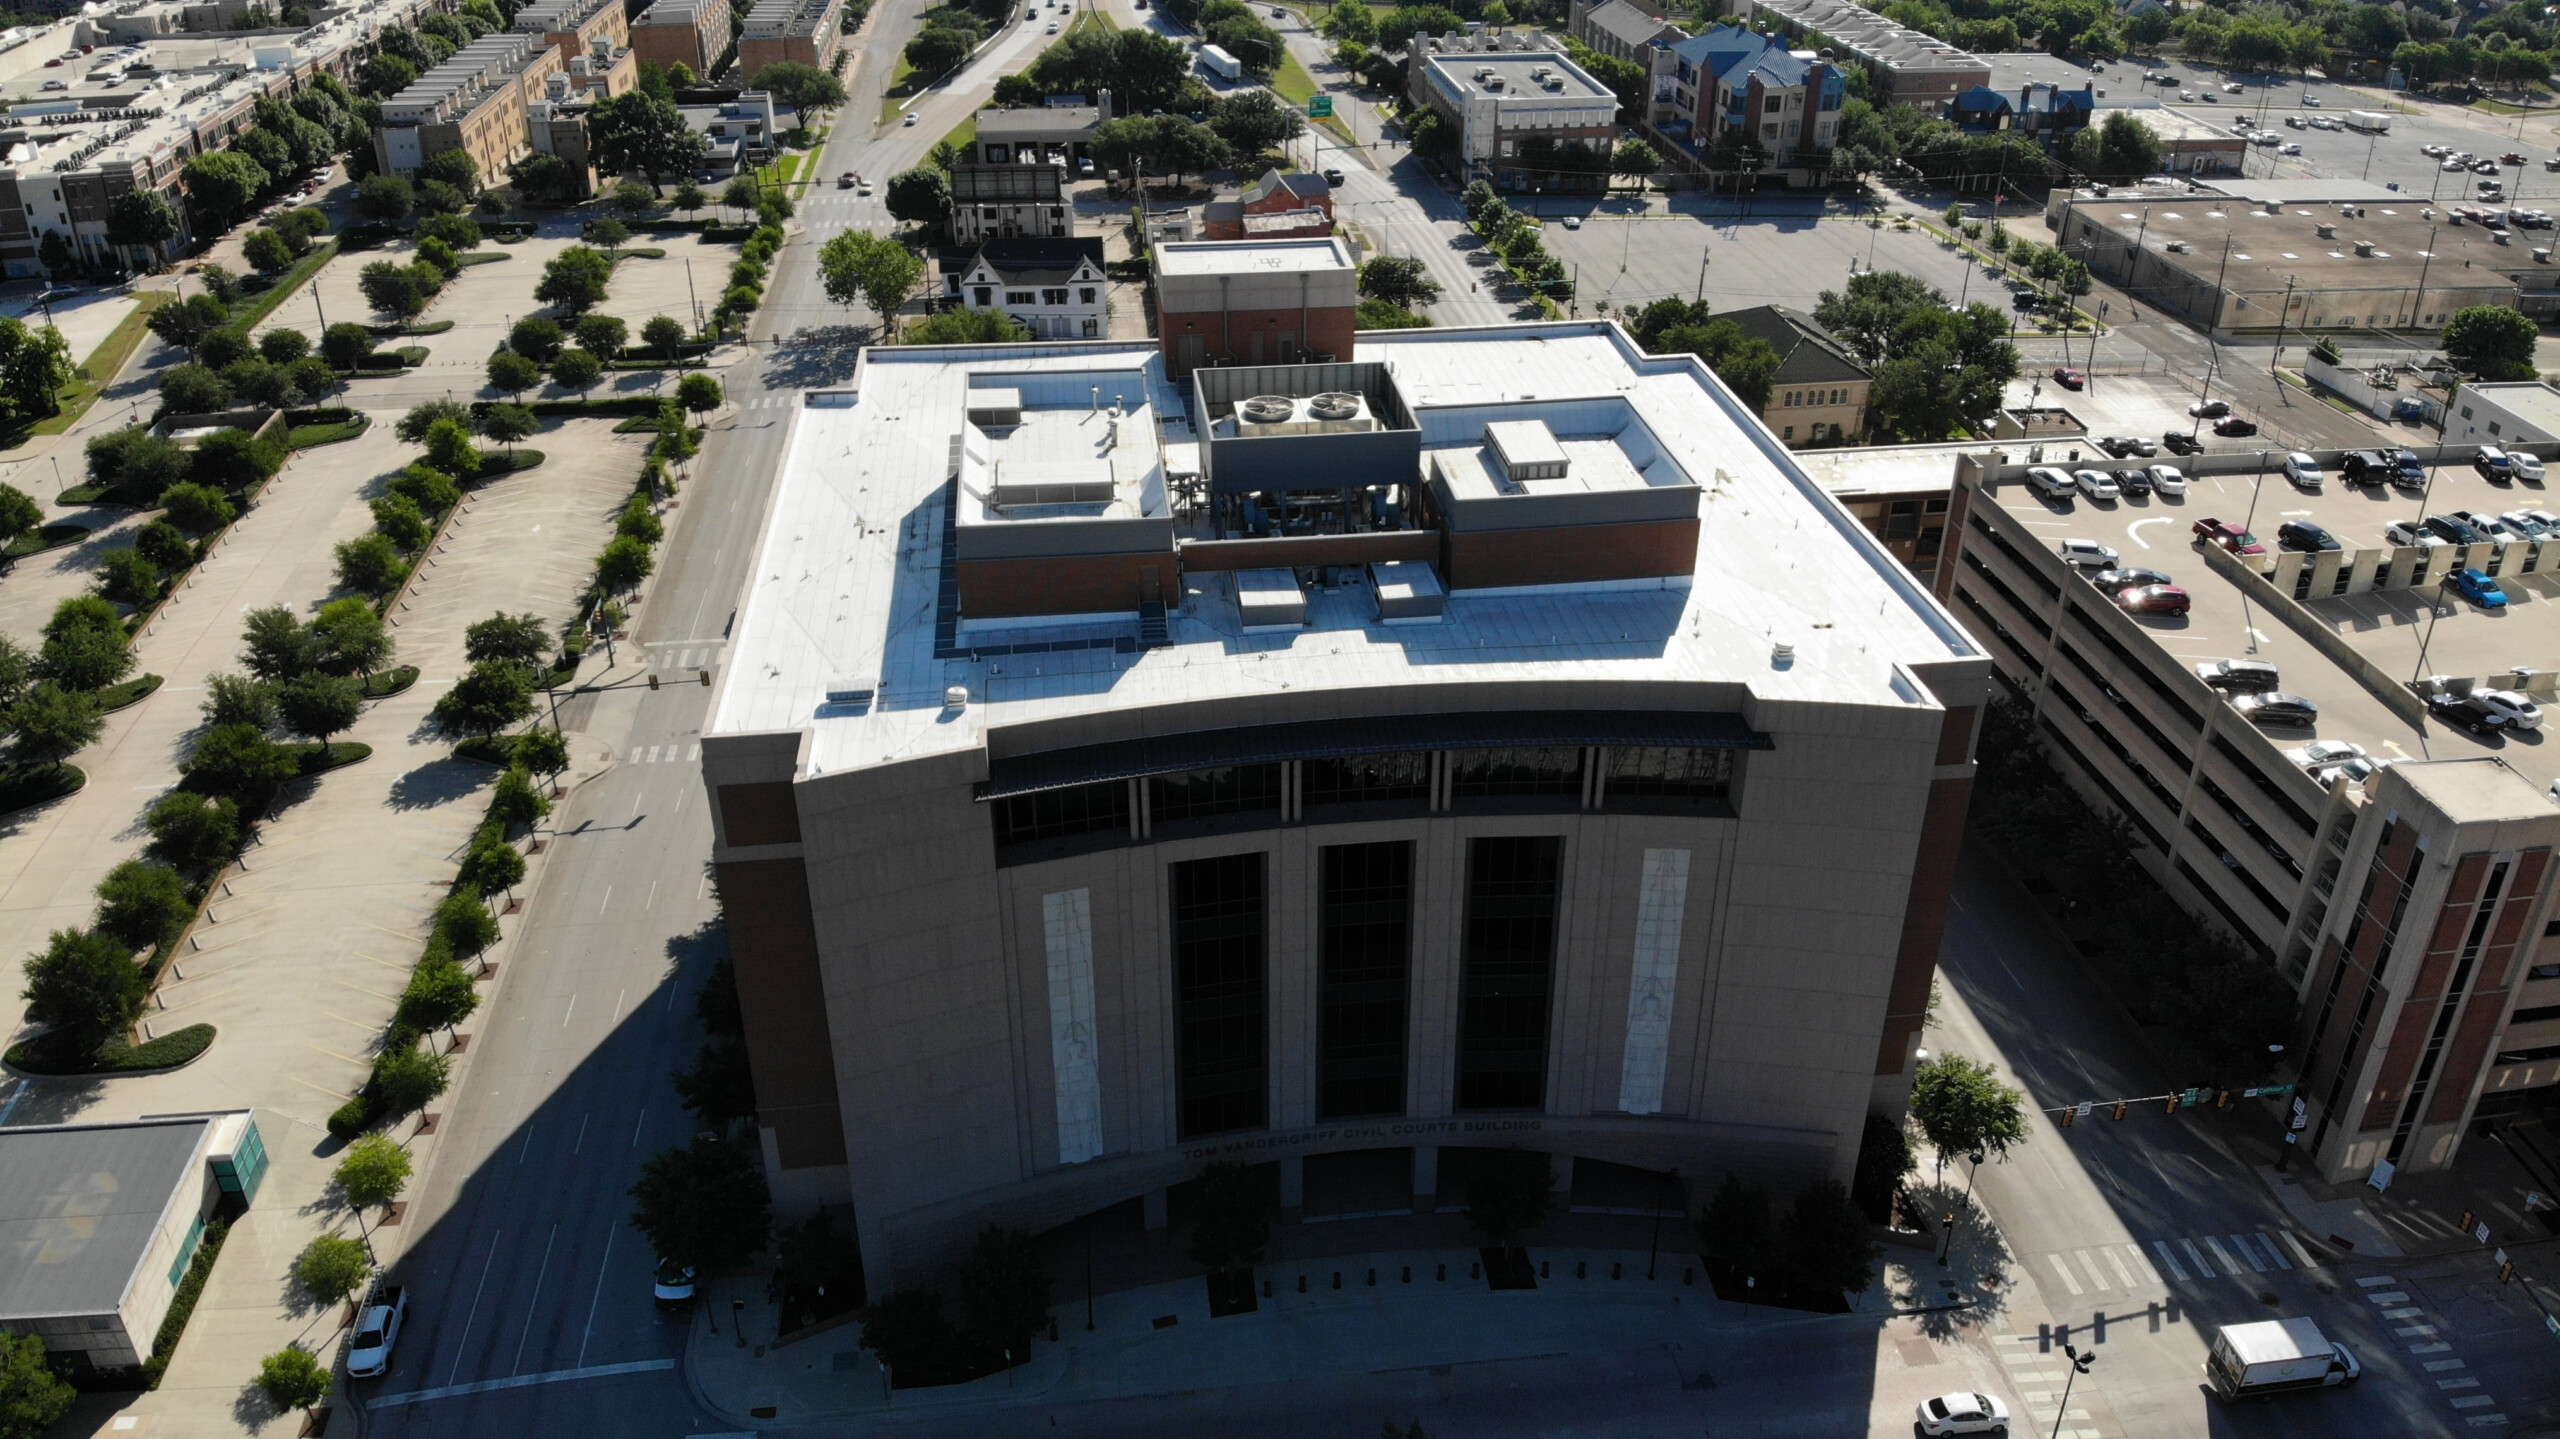 Tarrant County Civil Courts Building Jeff Eubank Roofing Co Inc